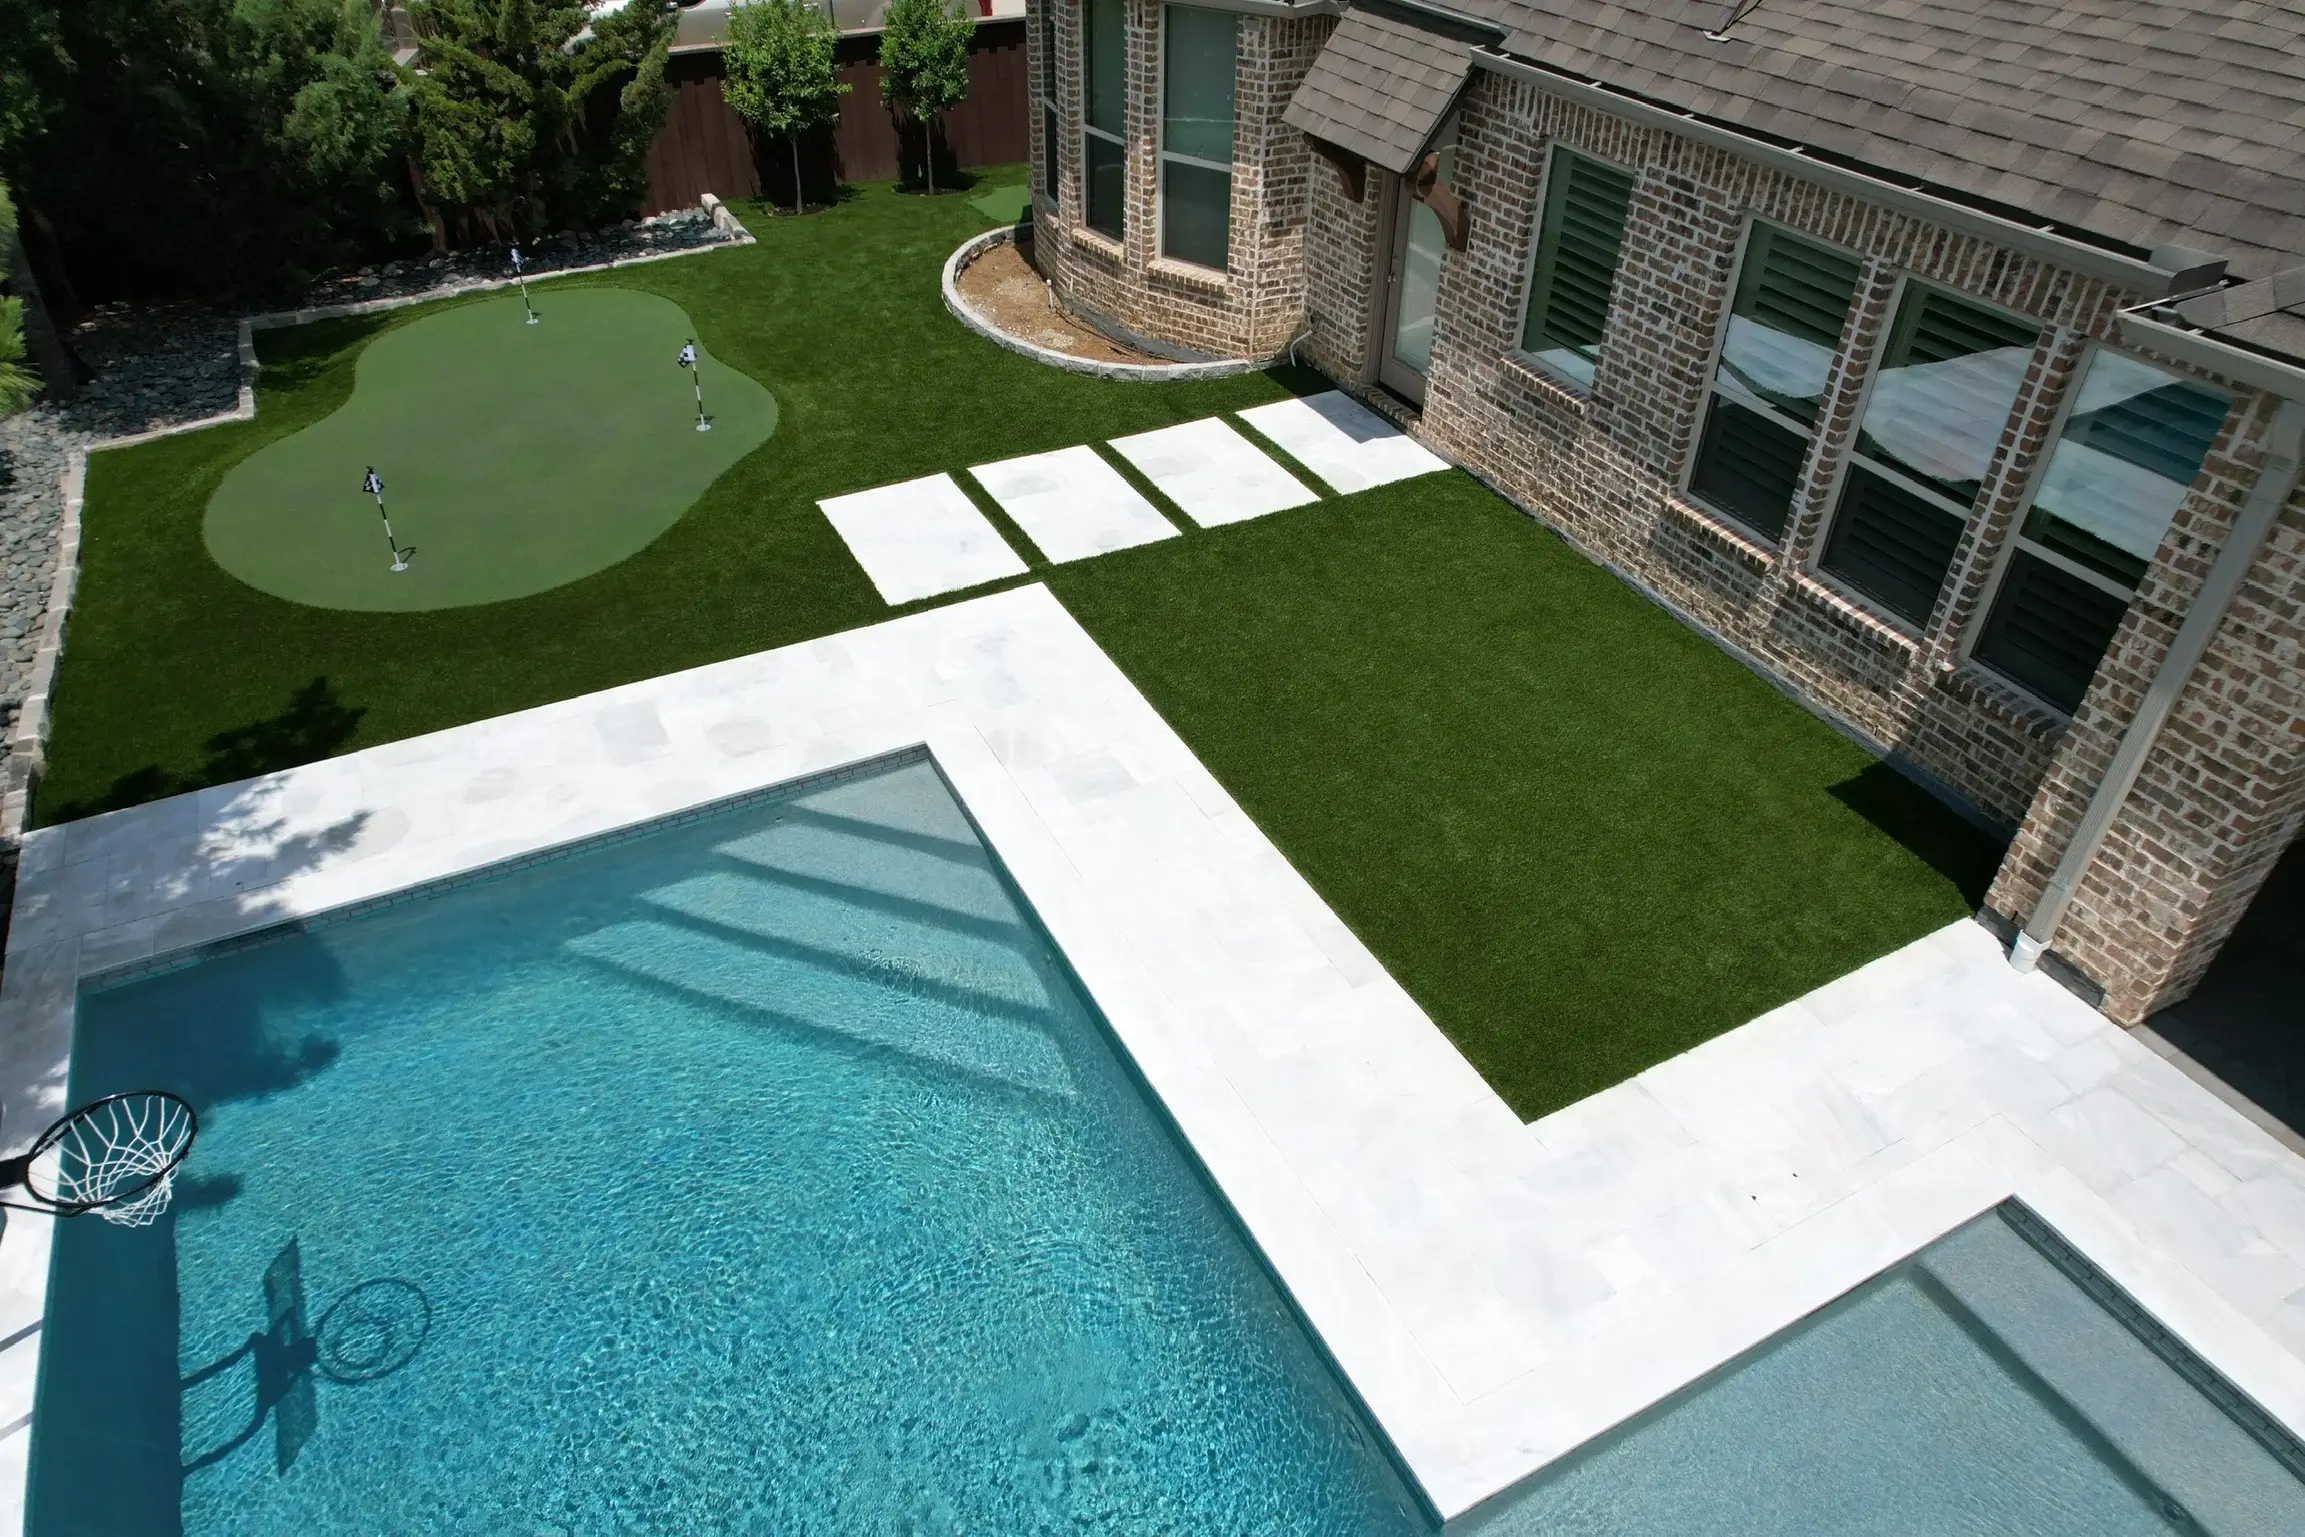 Luxury backyard with a clear blue swimming pool, basketball hoop, white stepping stones, artificial turf, and a small putting green, adjacent to a brick house with large windows.